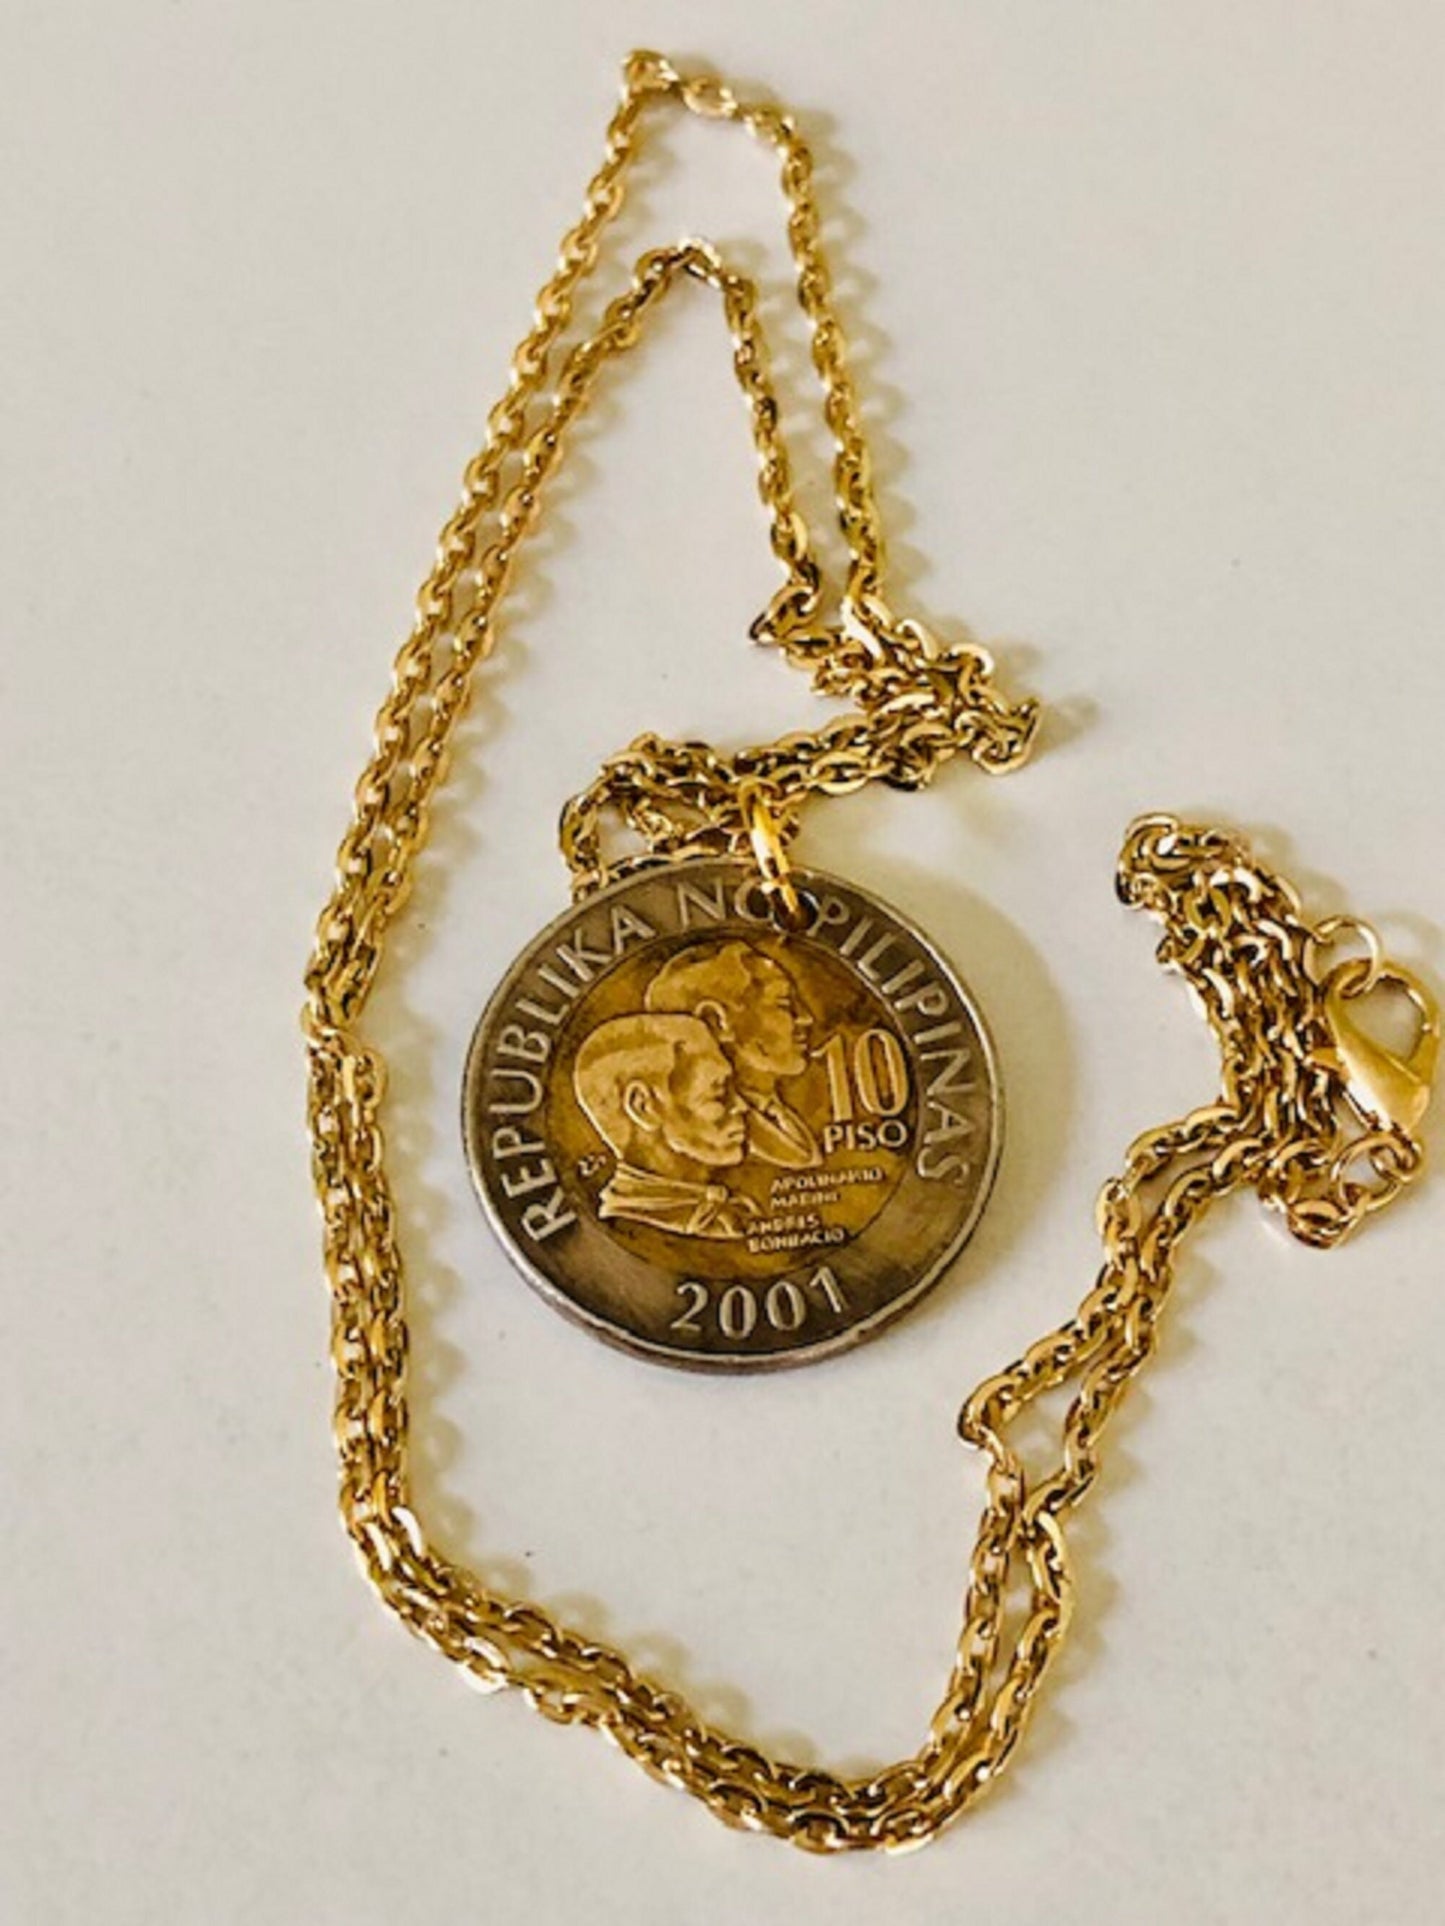 Philippines Coin Necklace Pendant Philippians 10 Piso Personal Vintage Handmade Jewelry Gift Friend Charm For Him Her World Coin Collector